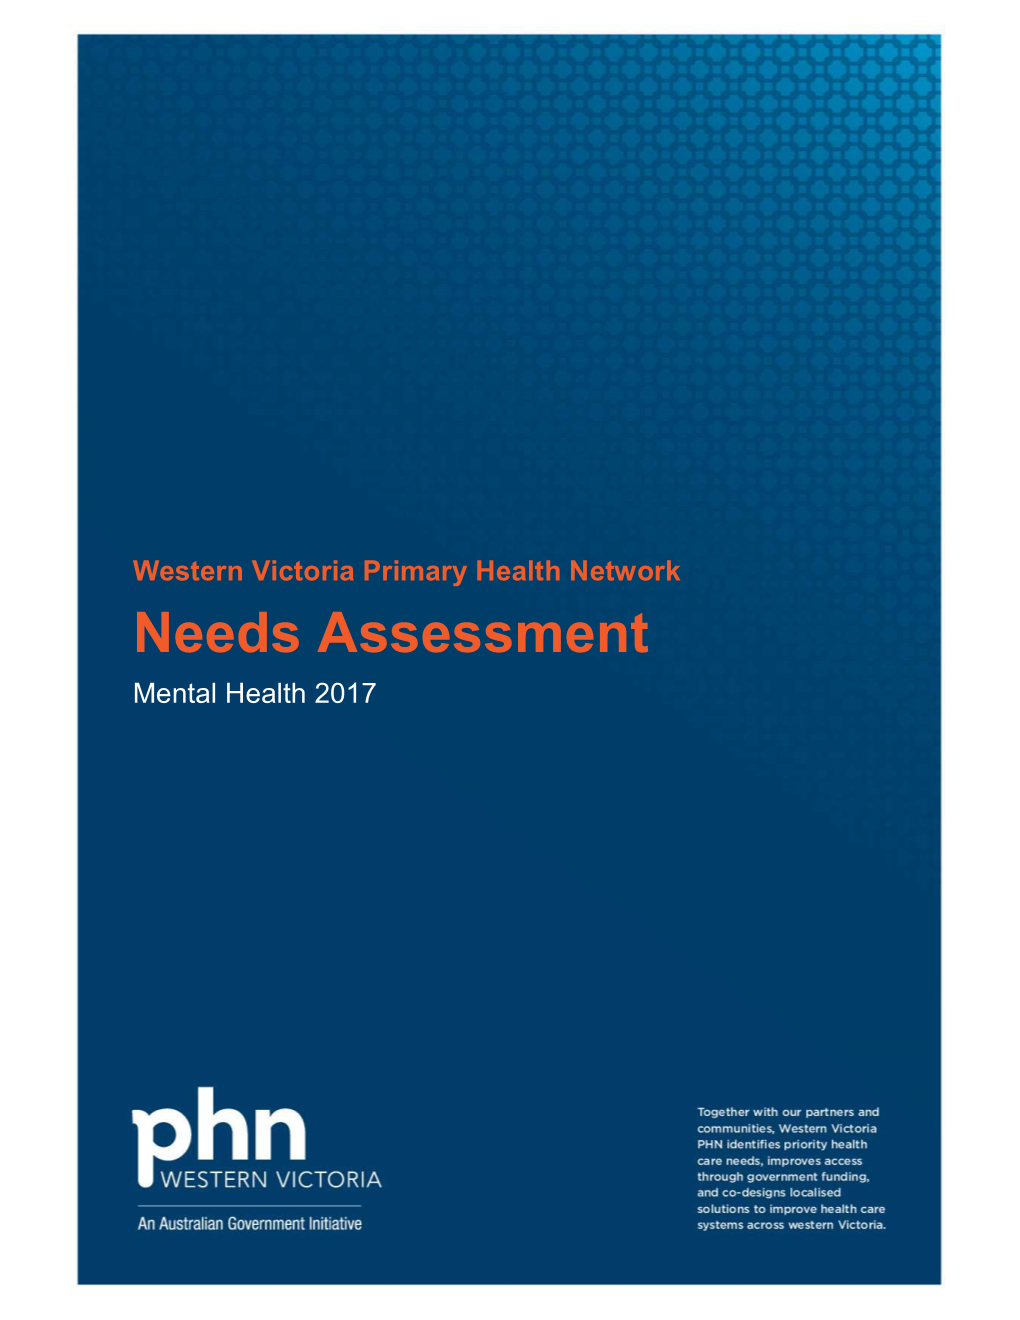 Western Victoria Primary Health Network Needs Assessment Mental Health 2017